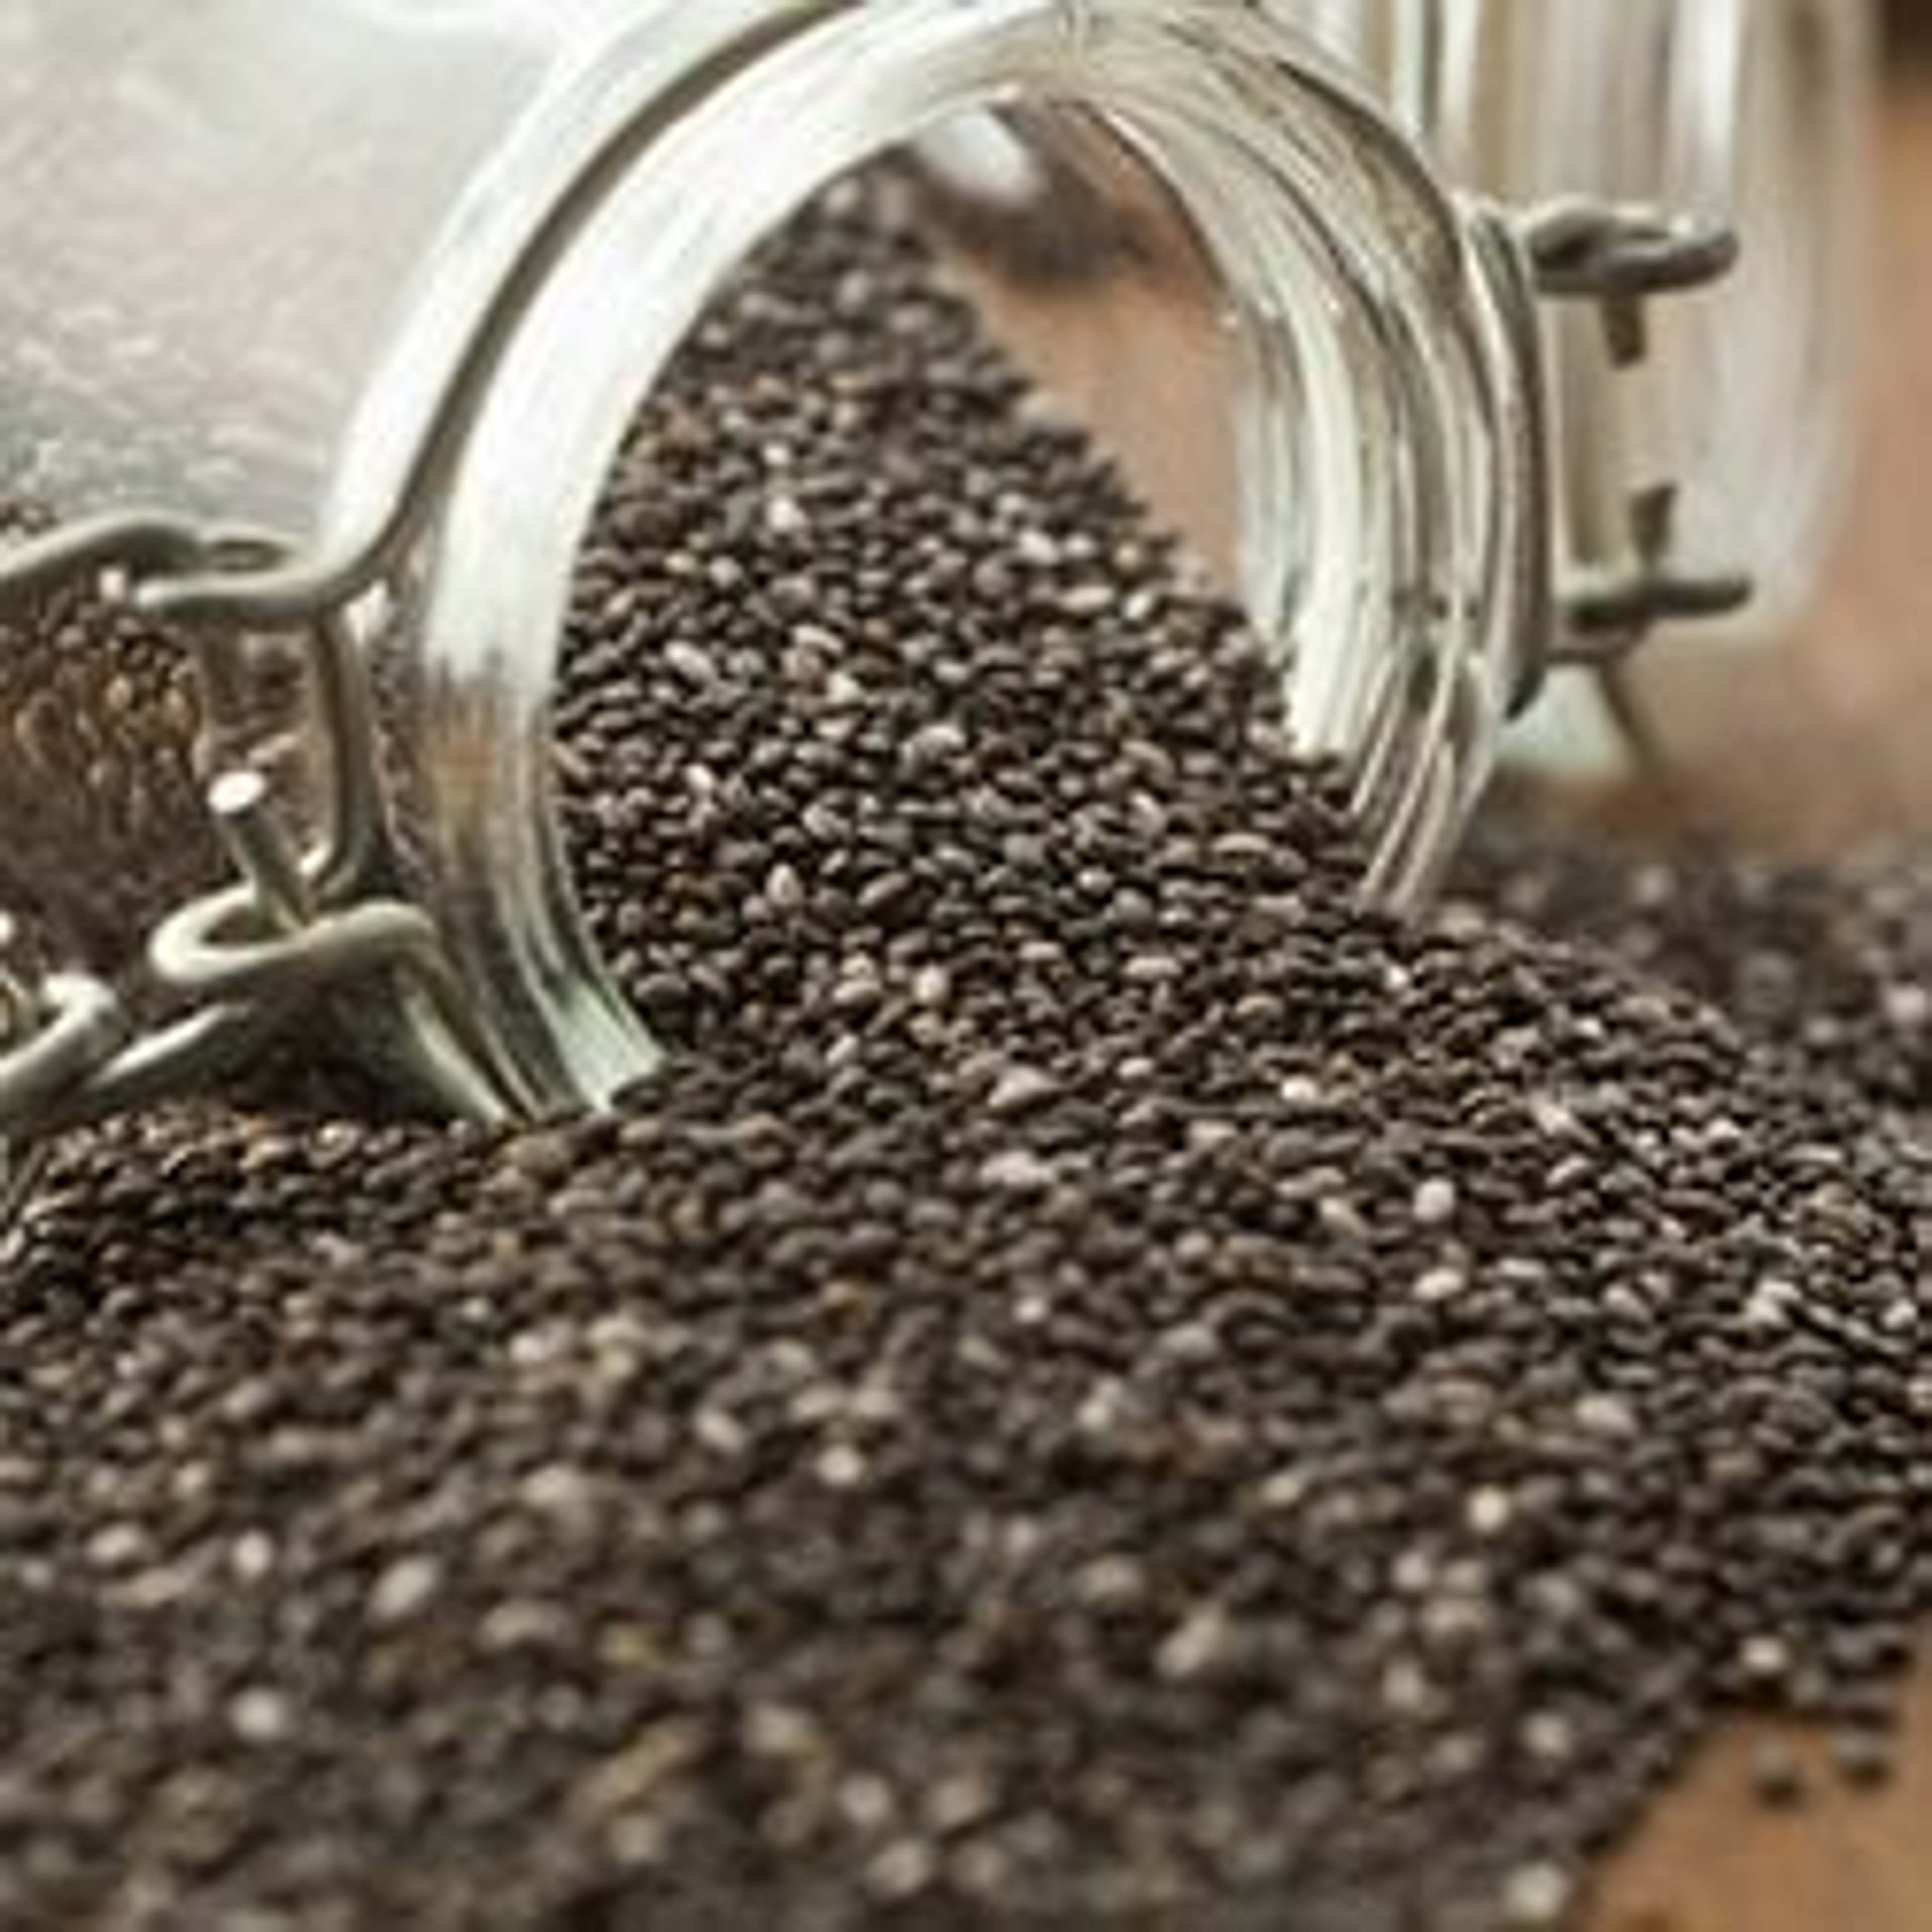 Chia seeds - The superfood rich in vital substances